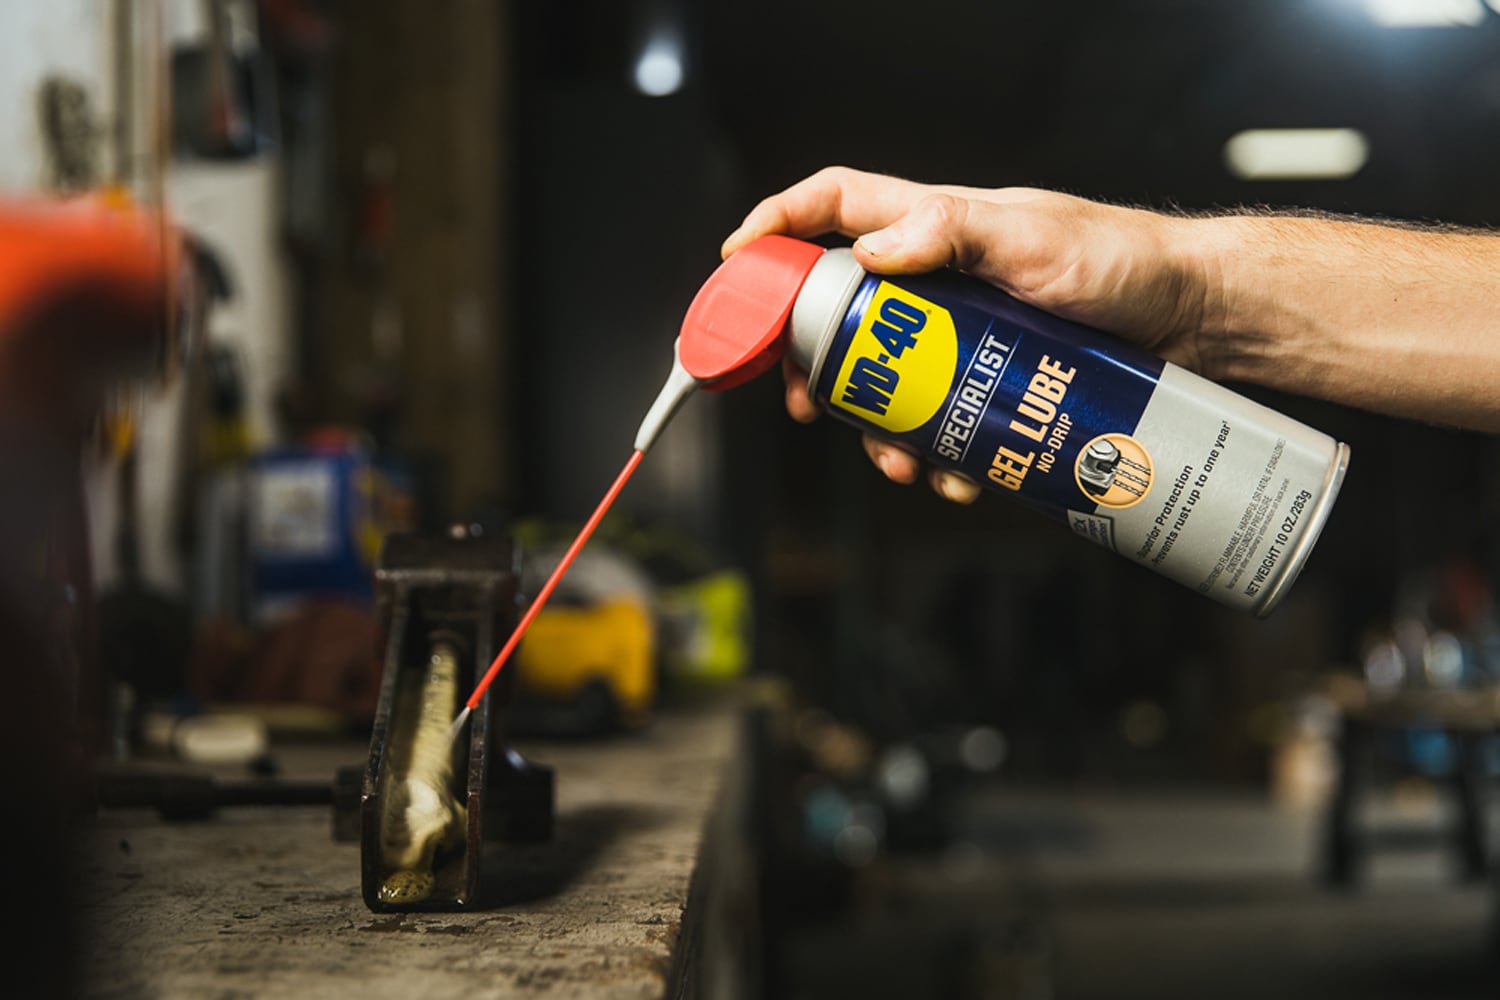 WD-40 SPECIALIST - Lubricants - Car Fluids & Chemicals - The Home